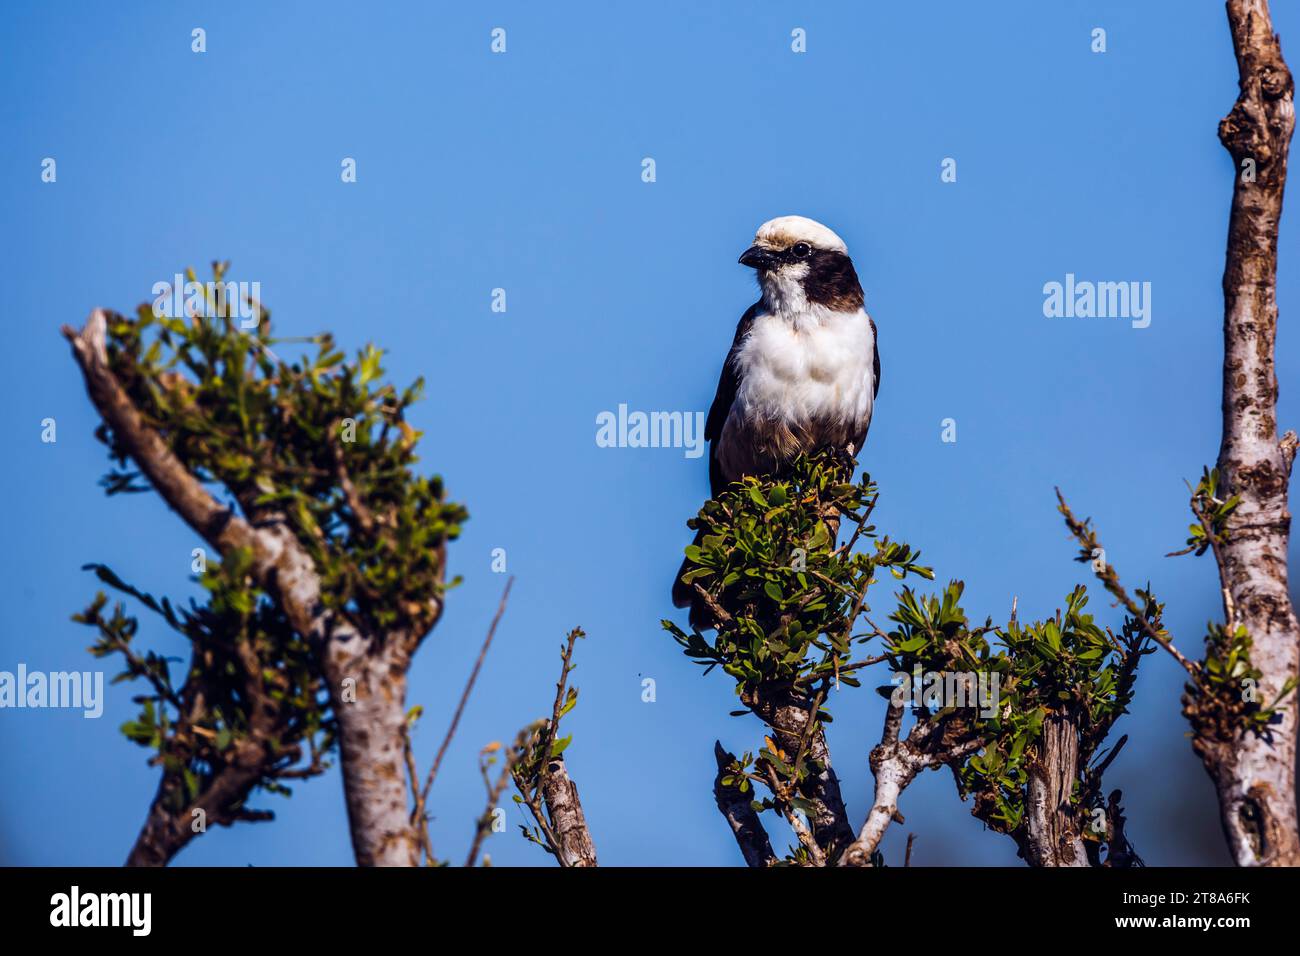 White crowned Shrike standing on a bush isolated in blue sky in Kruger National park, South Africa ; Specie Eurocephalus anguitimens family of Laniida Stock Photo